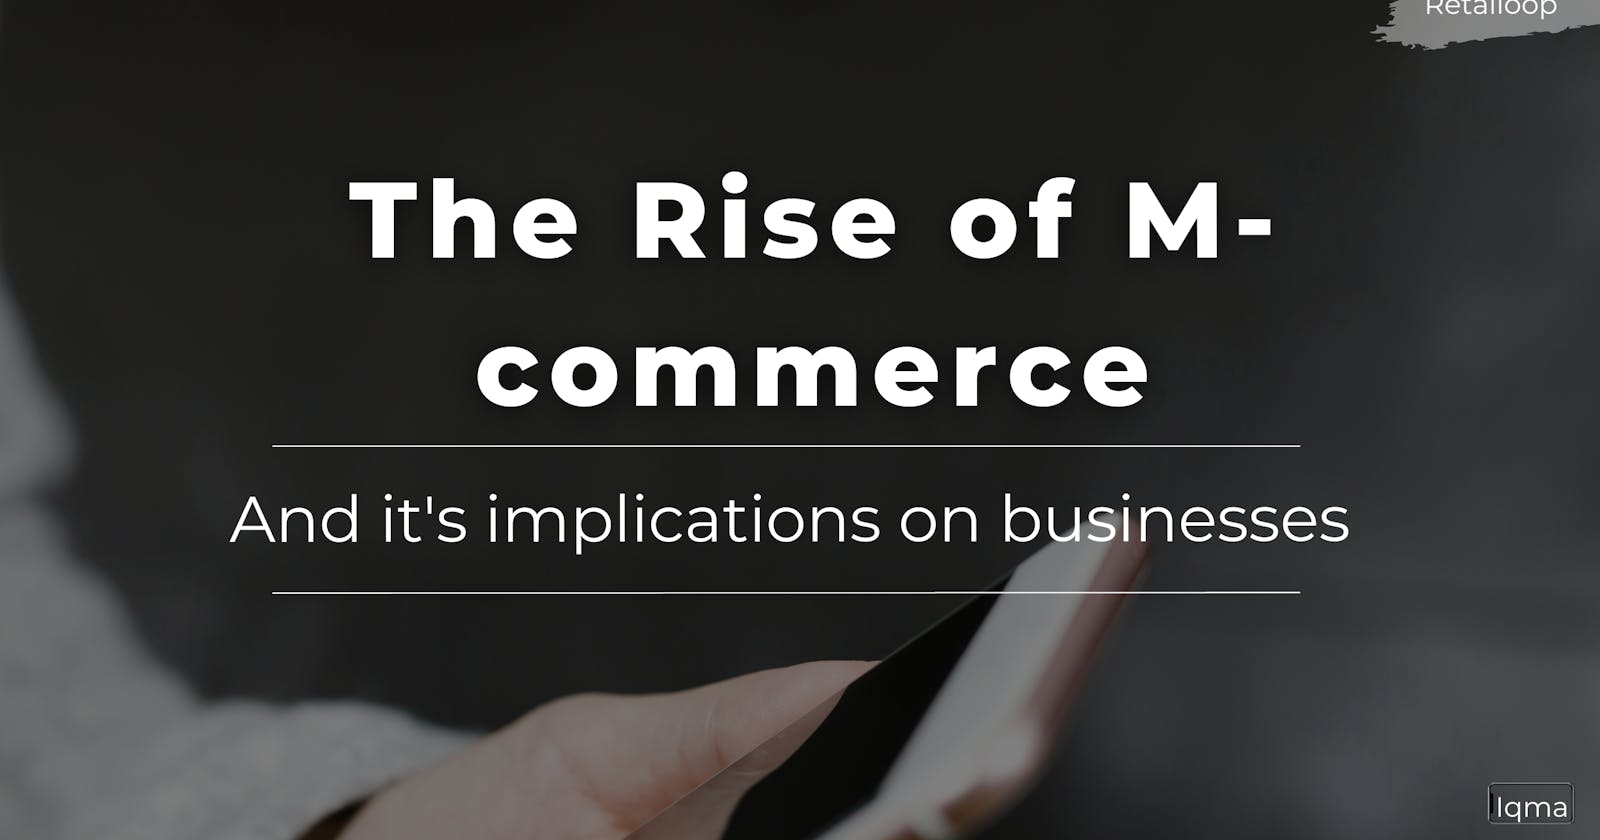 The Rise of Mobile Commerce and its Implications on Businesses